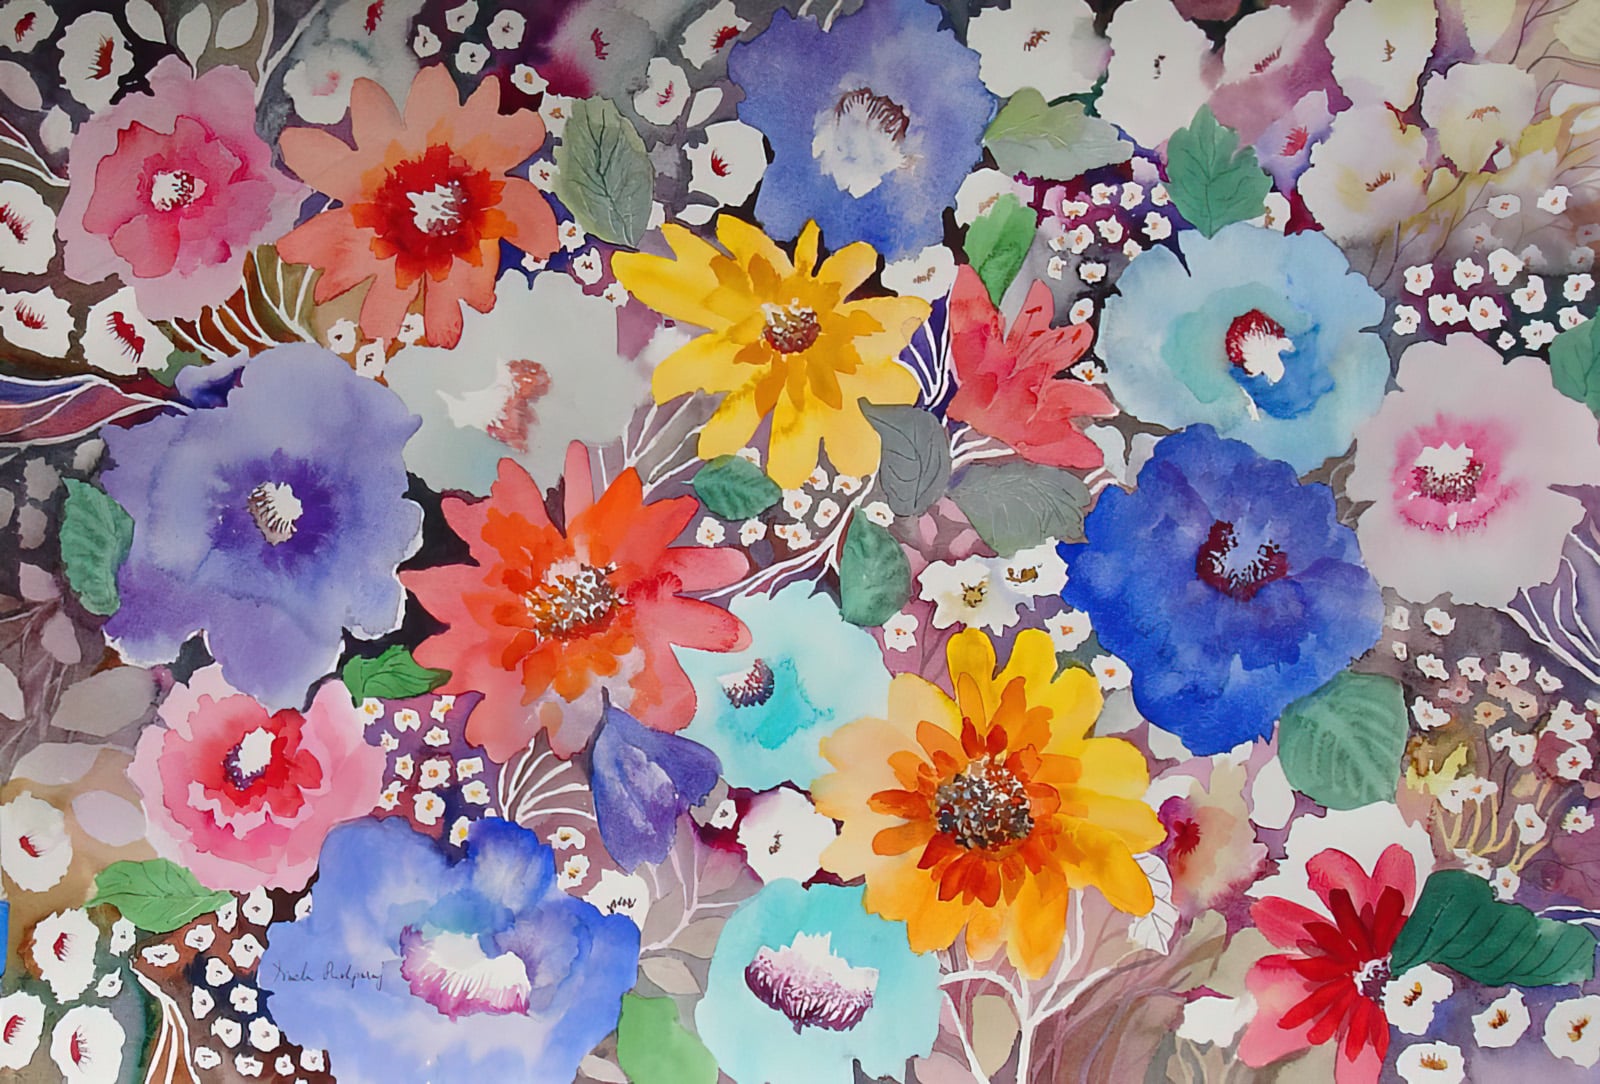 "Floral Quilt" Watercolor On 140 lbs Arches Paper. 15"x22" by Neela Pushparaj